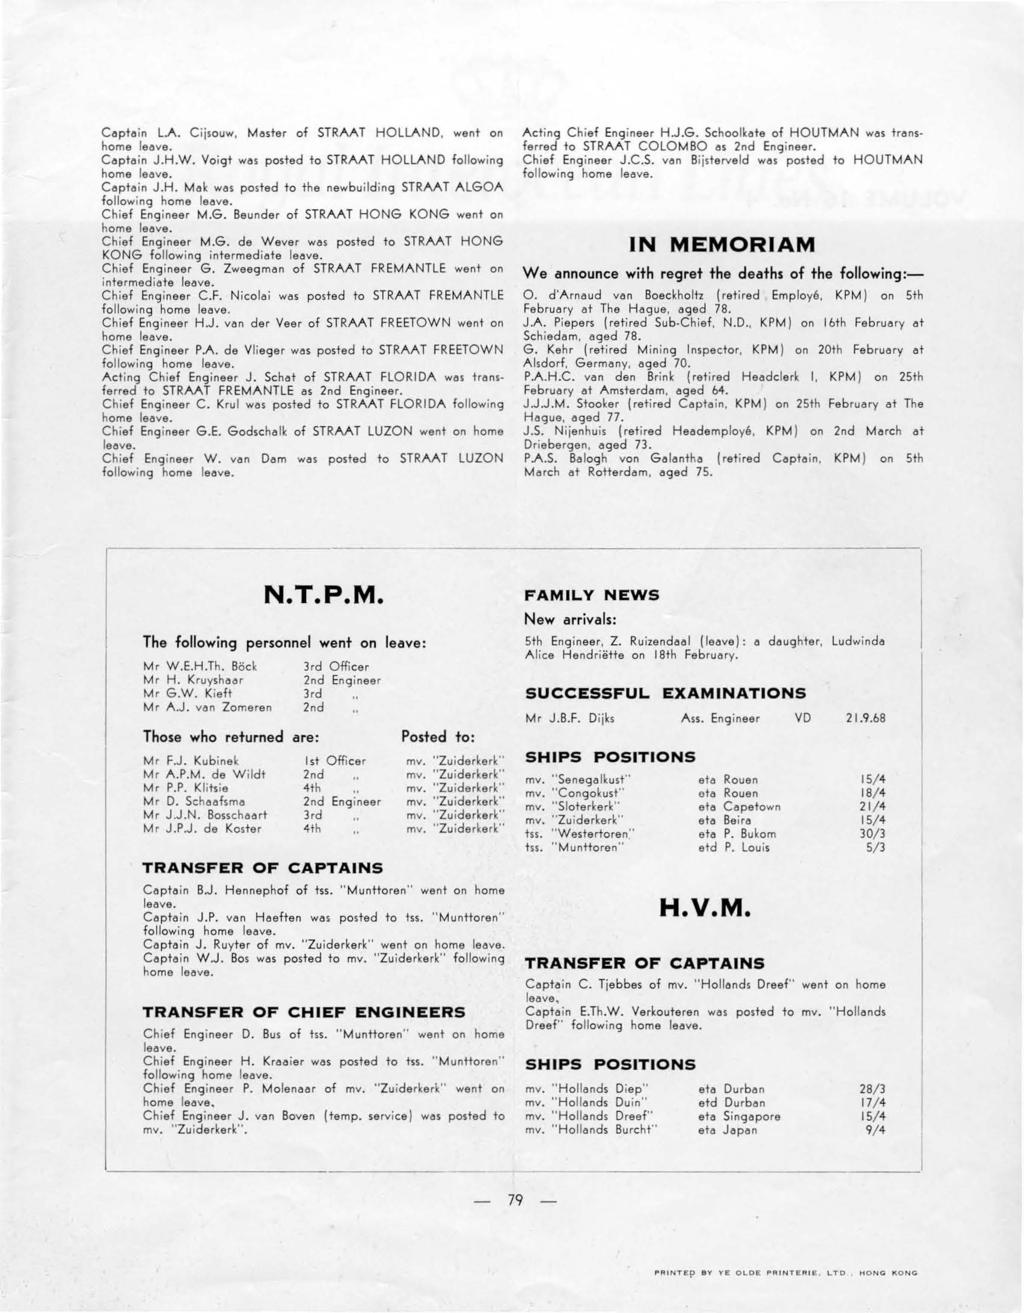 C&pt&in l.a. Ciisouw, M&ster of STRAAT HOLLAND, went on home Jeove. Copt&in J.H.W. Voigt WO$ posted to STRAAT HOLLAND foljowing home Je&ve. Copt&in J.H. M& k w&s posted to the newbuilding STRAAT ALGOA follow ing home le&ve.